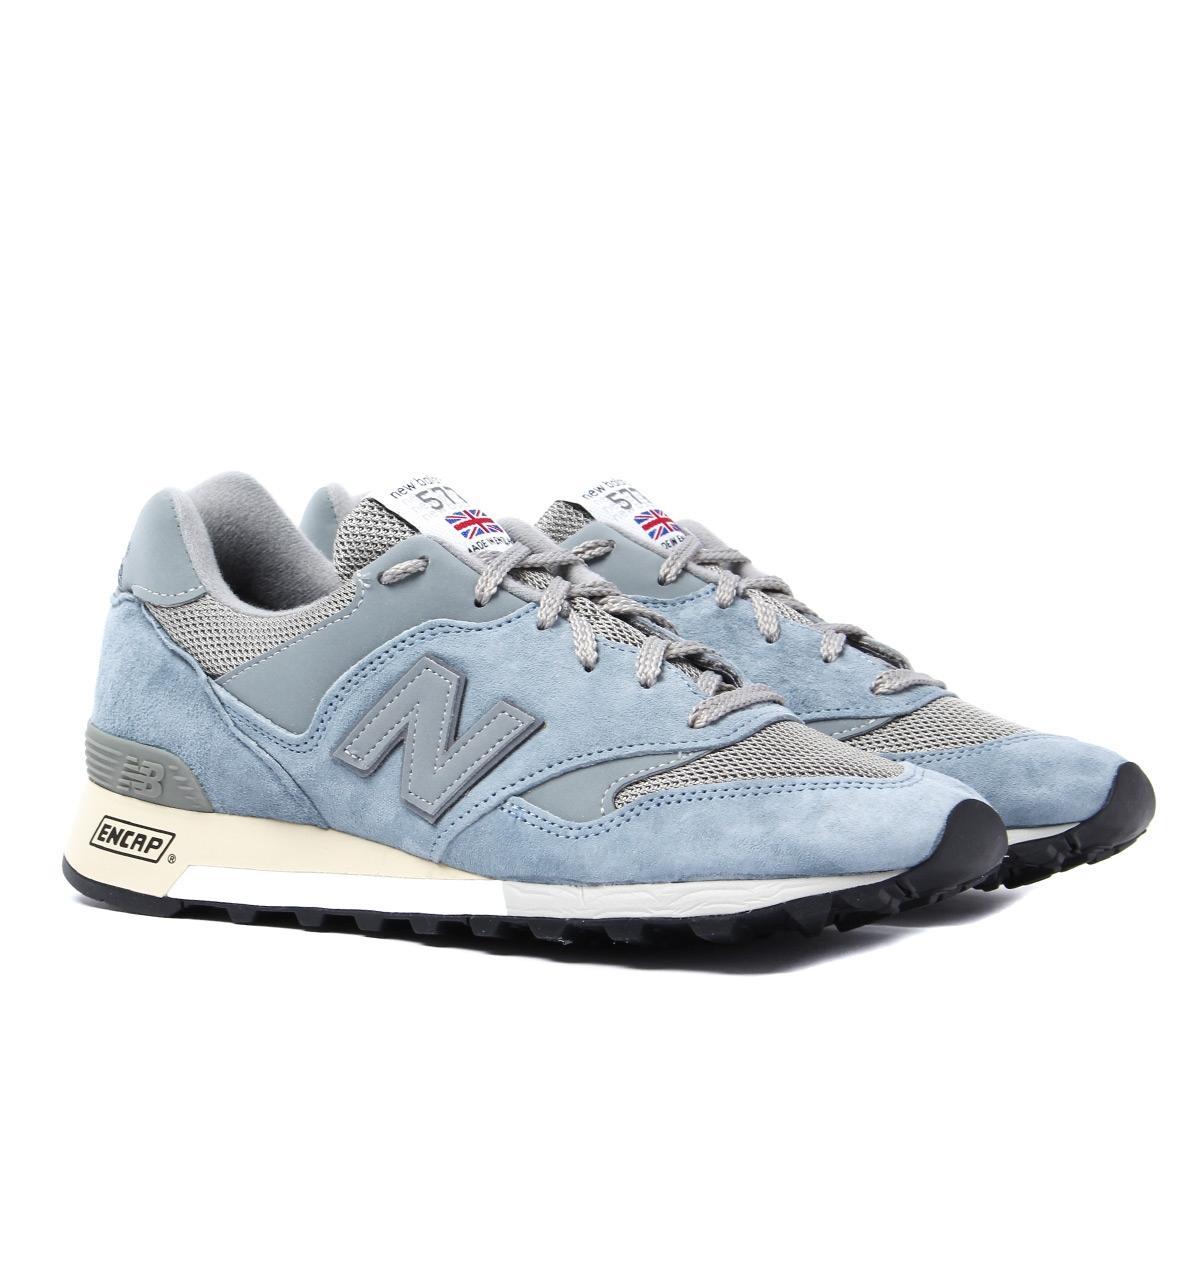 New Balance Suede 577 Cadet Blue Trainers - Lyst